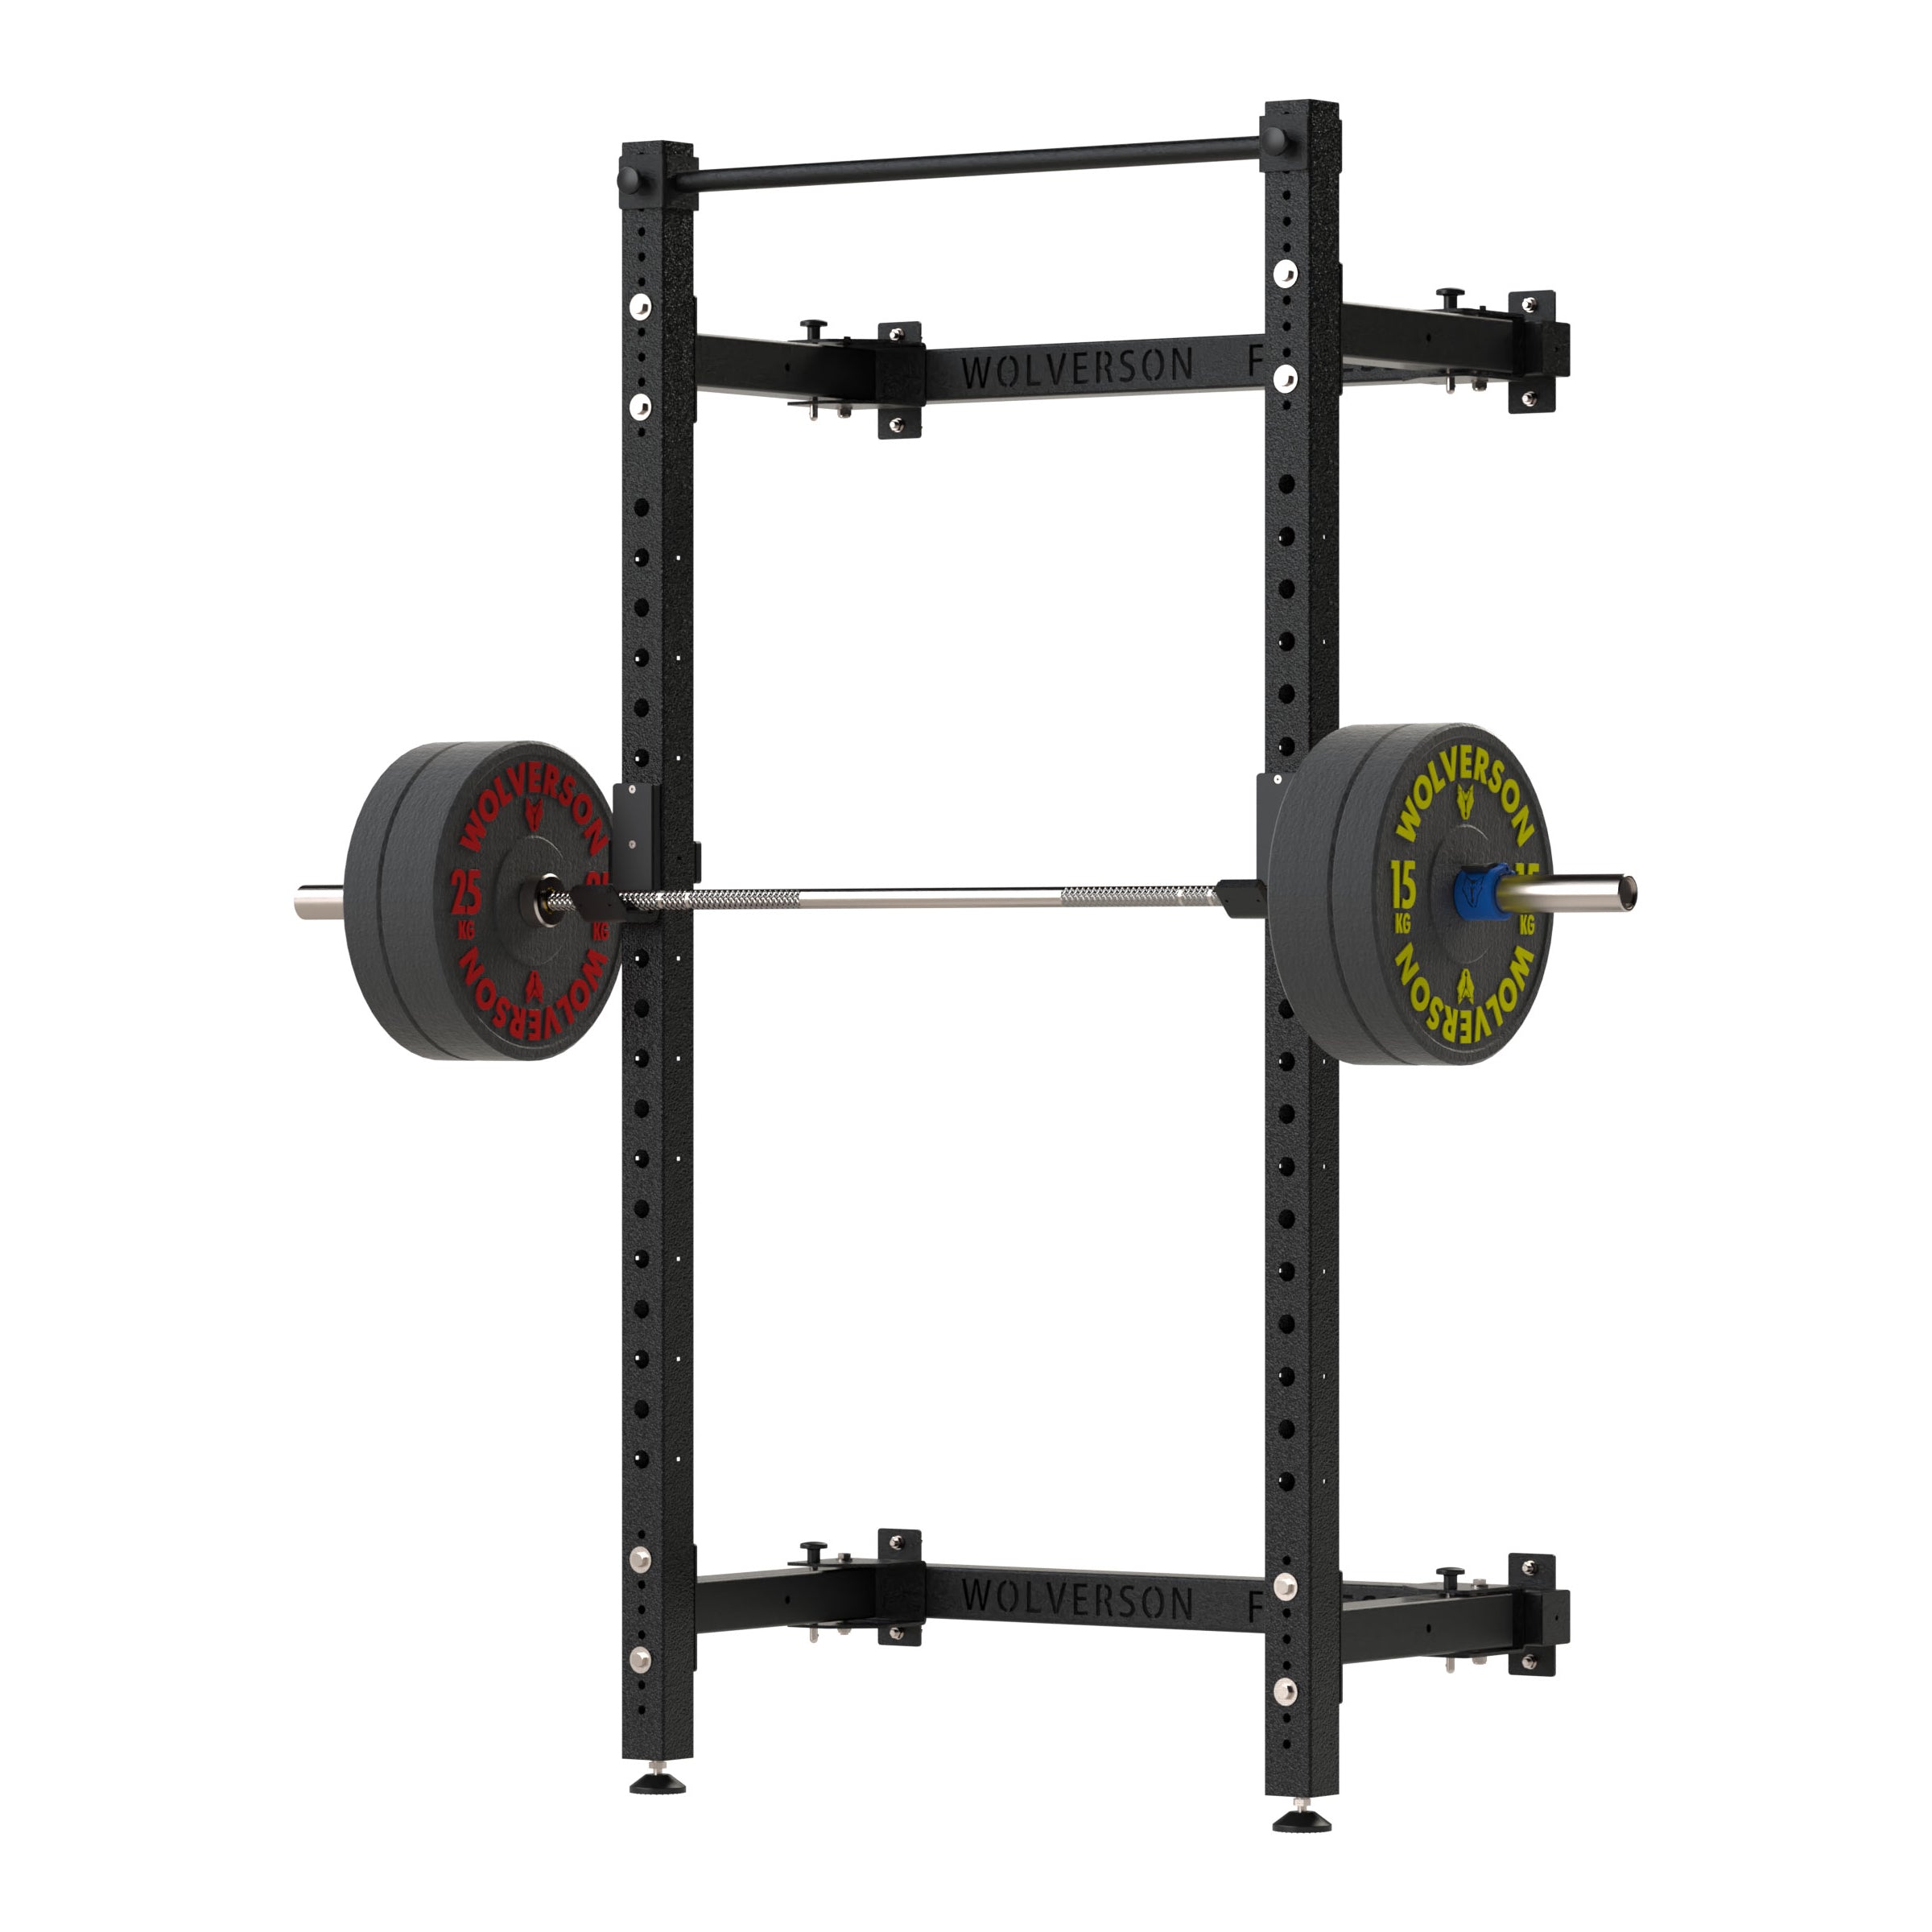 Bison Series Folding Rack - Wolverson Fitness